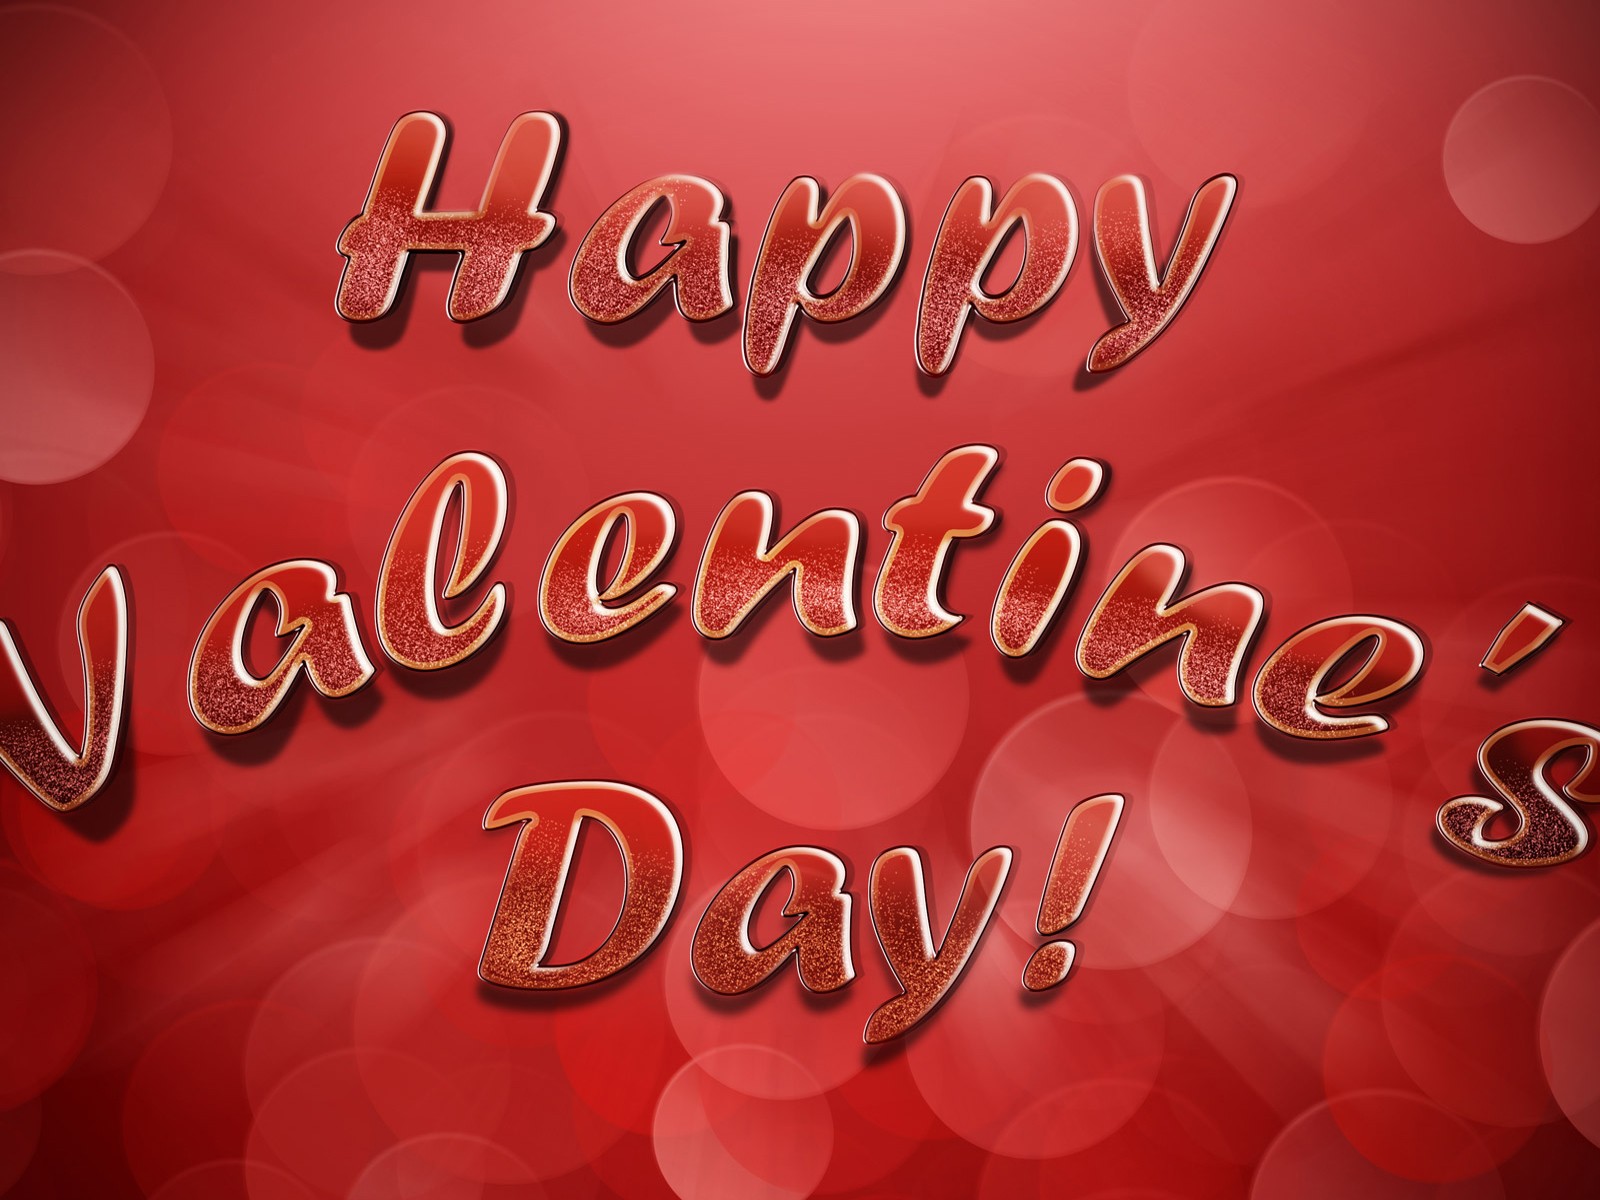 Hd Images Of Valentines Day Full Screen - HD Wallpaper 